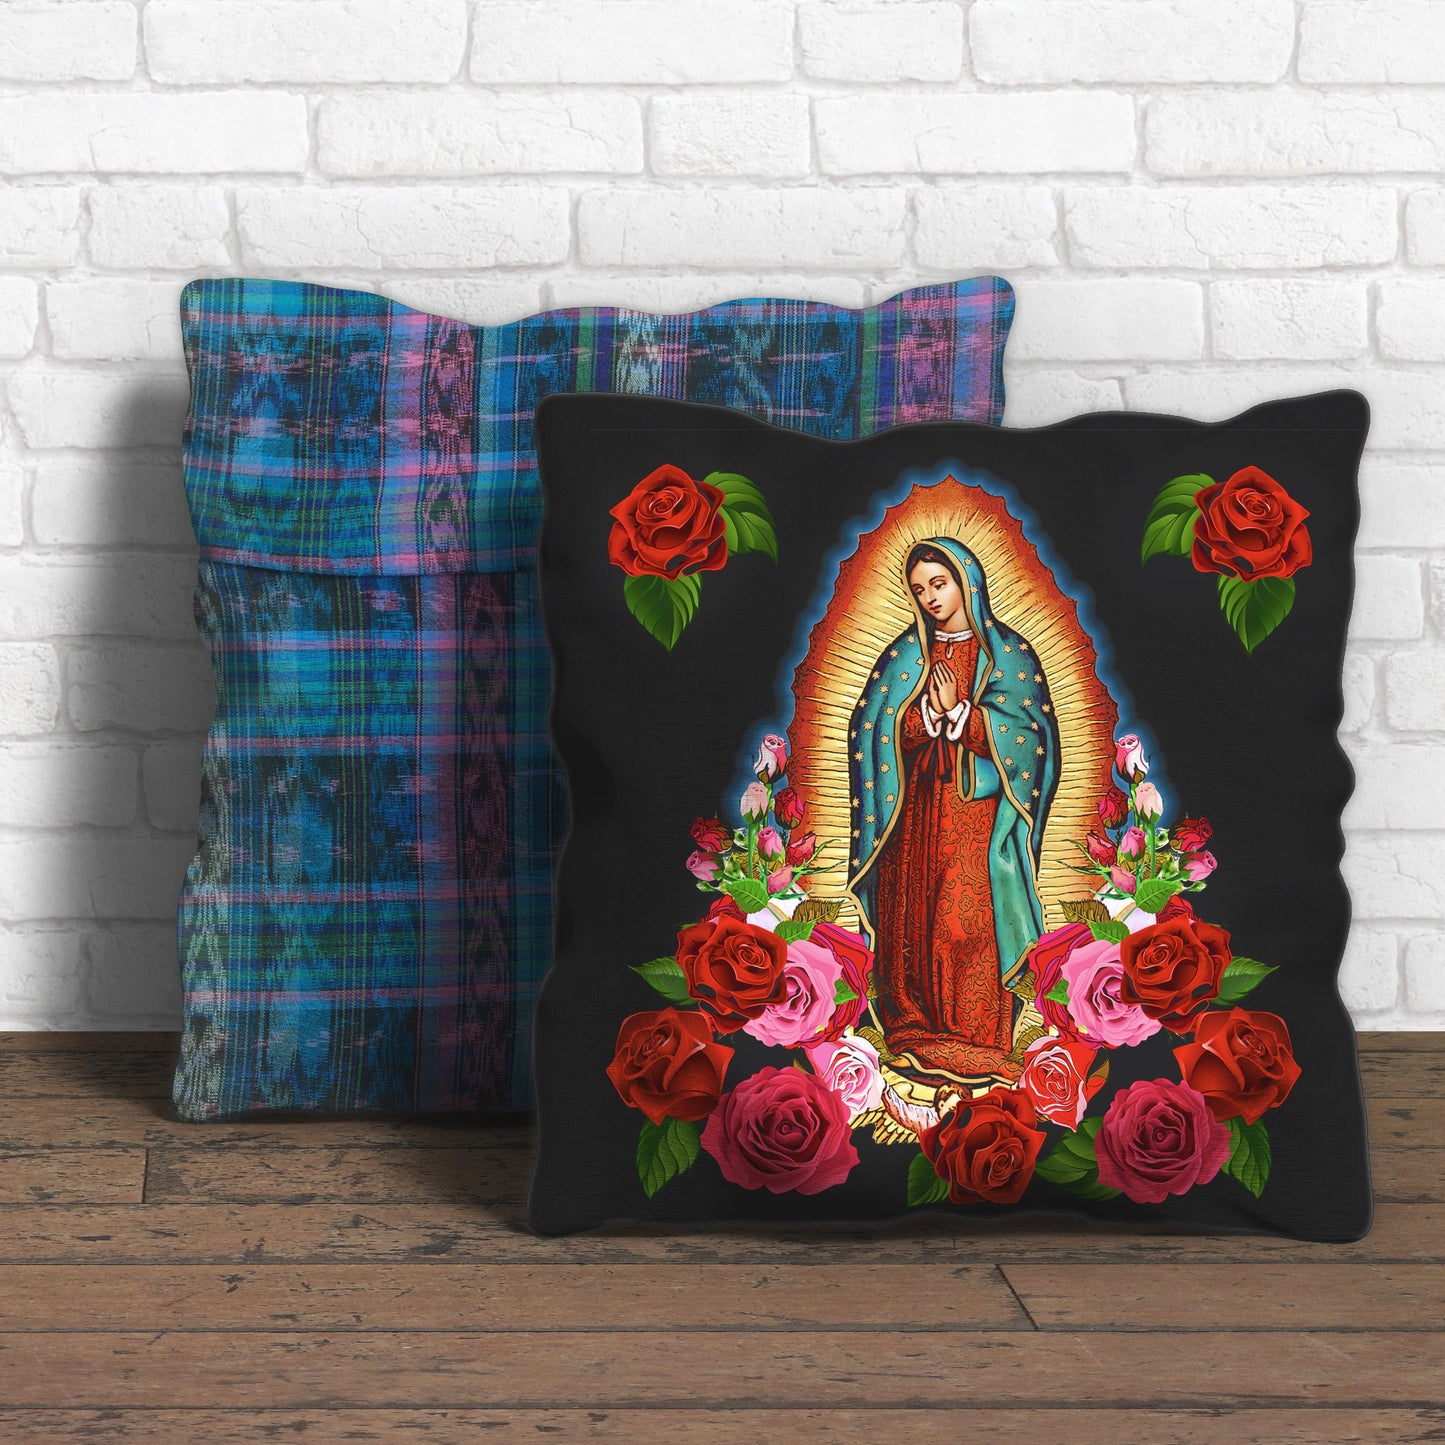 Our Lady of Guadalupe Fabric panel, Virgin Mary Black fabric square for crafts, pillow covers, wall hanging, bandana or clothing